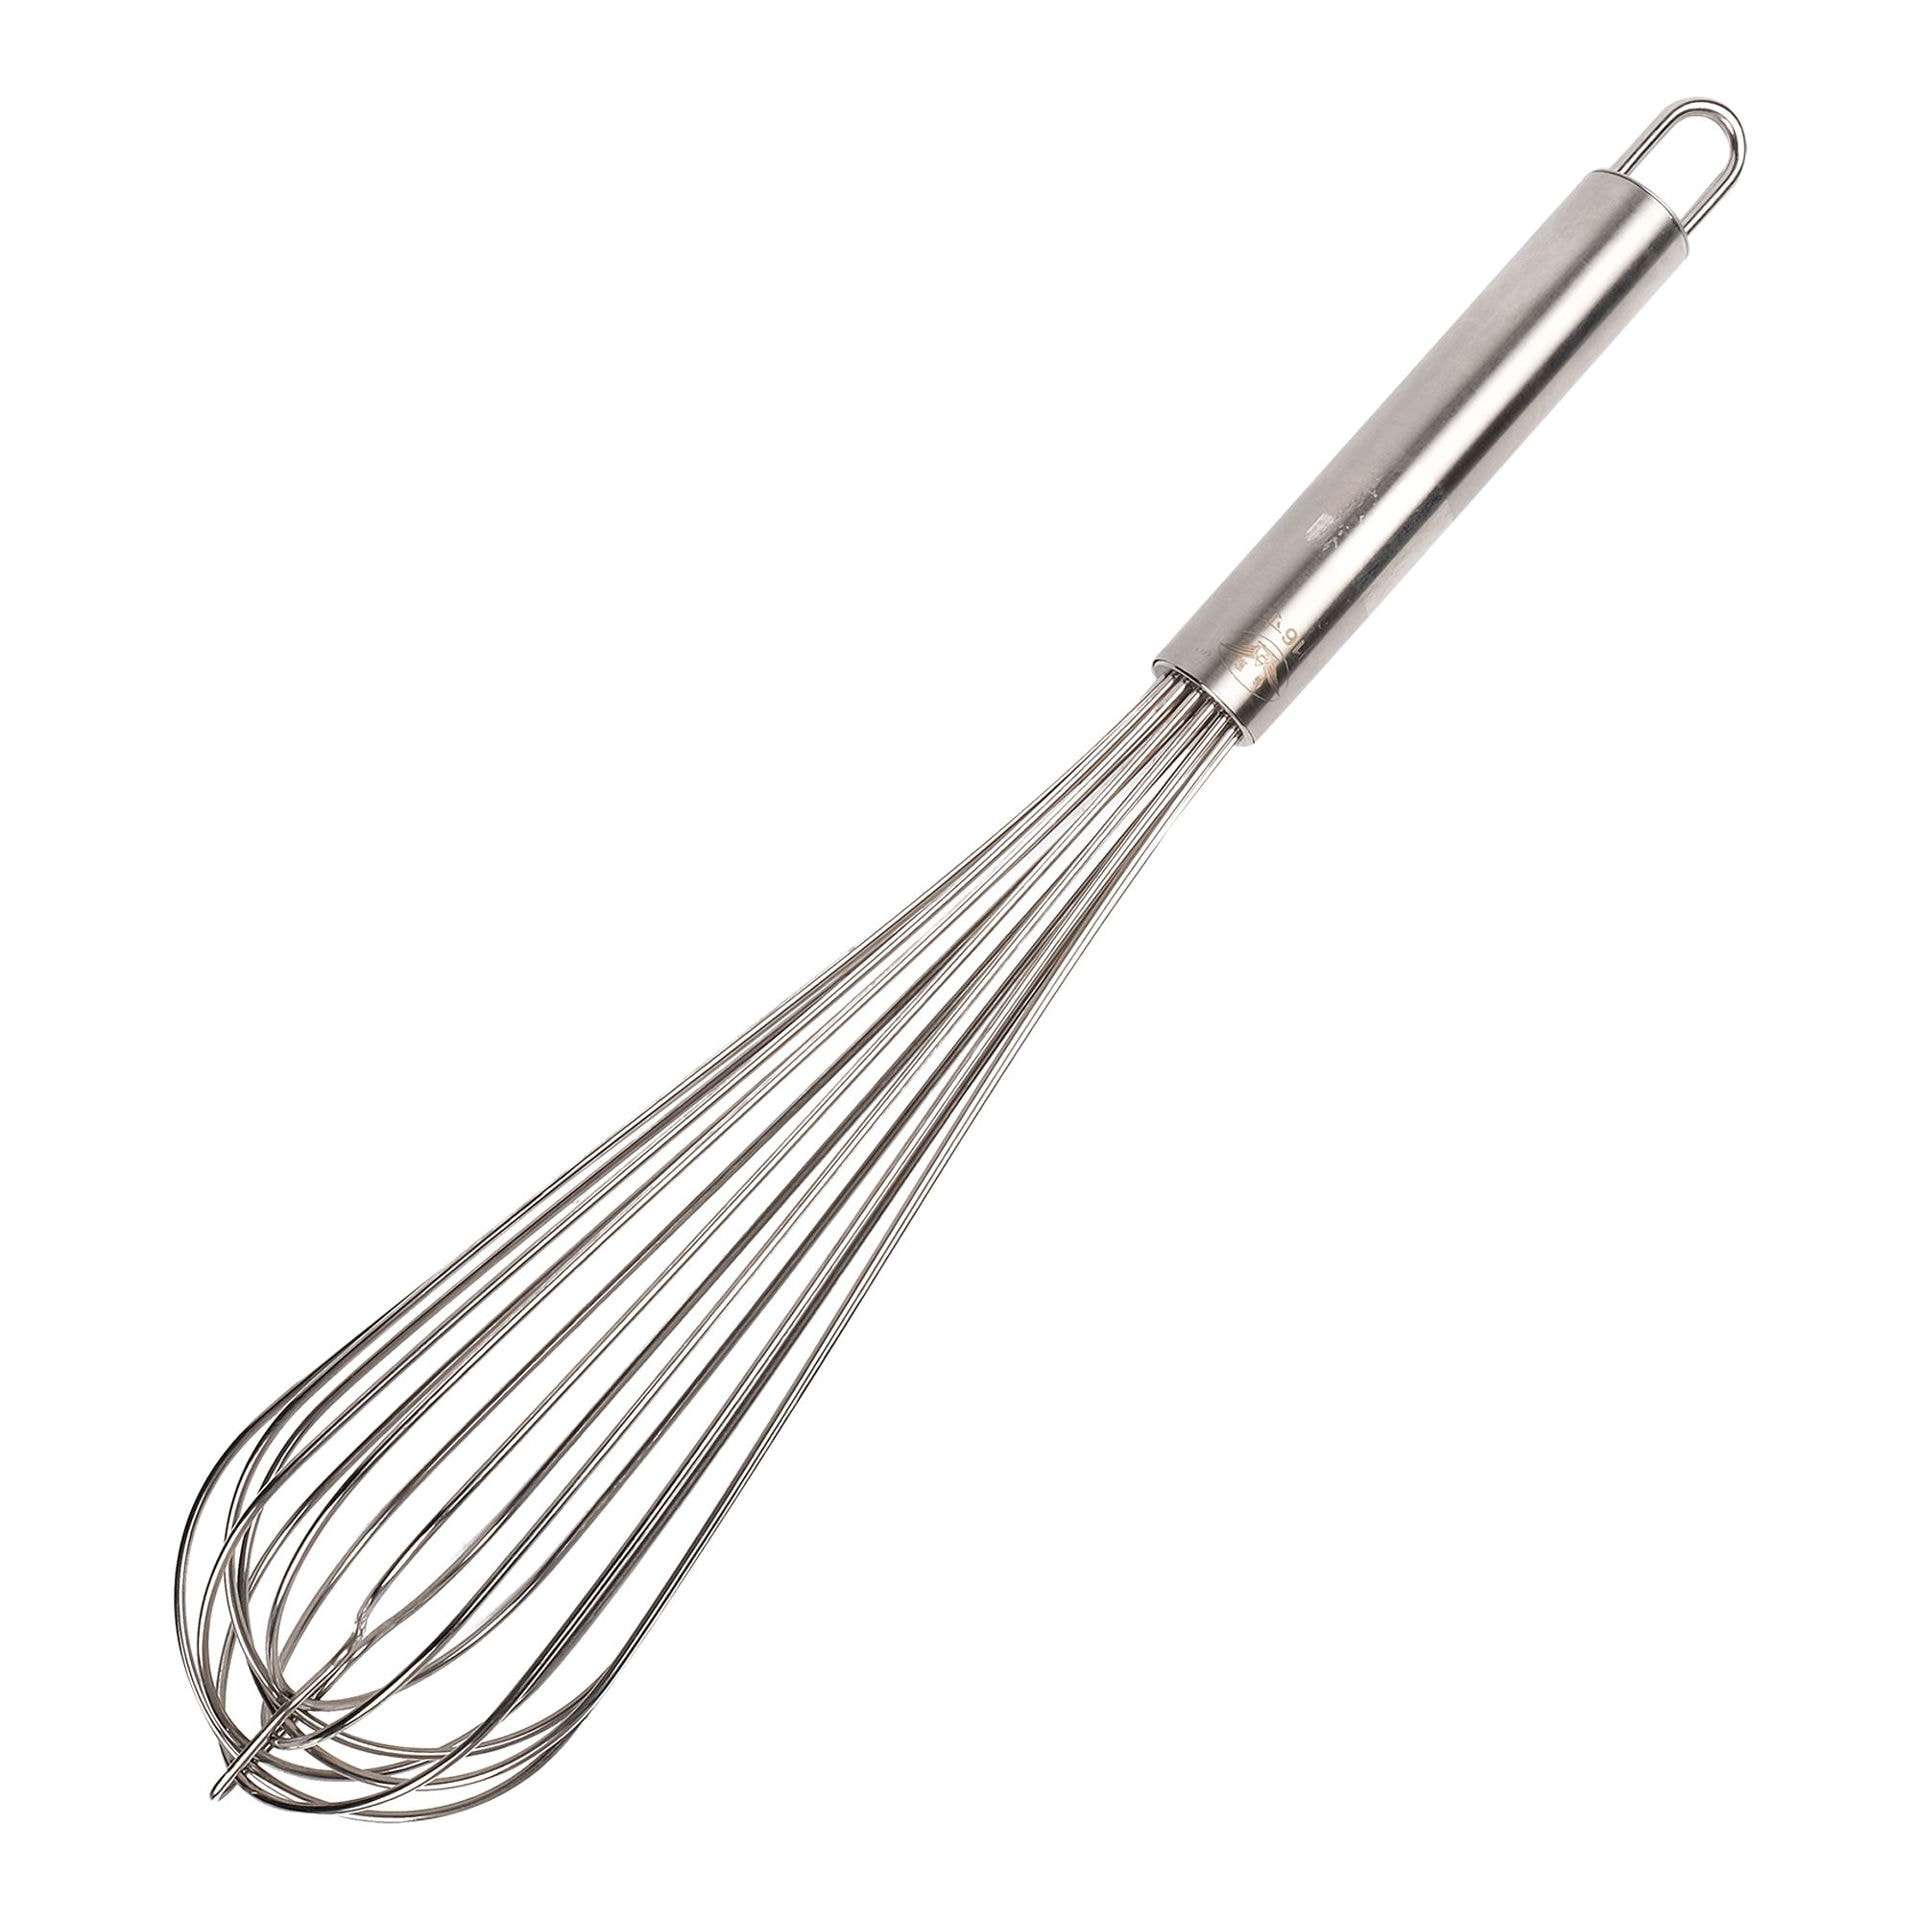 https://assets.dragonmart.ae/pictures/0817348_ds-stainless-steel-egg-beater-20inch-silver.jpeg